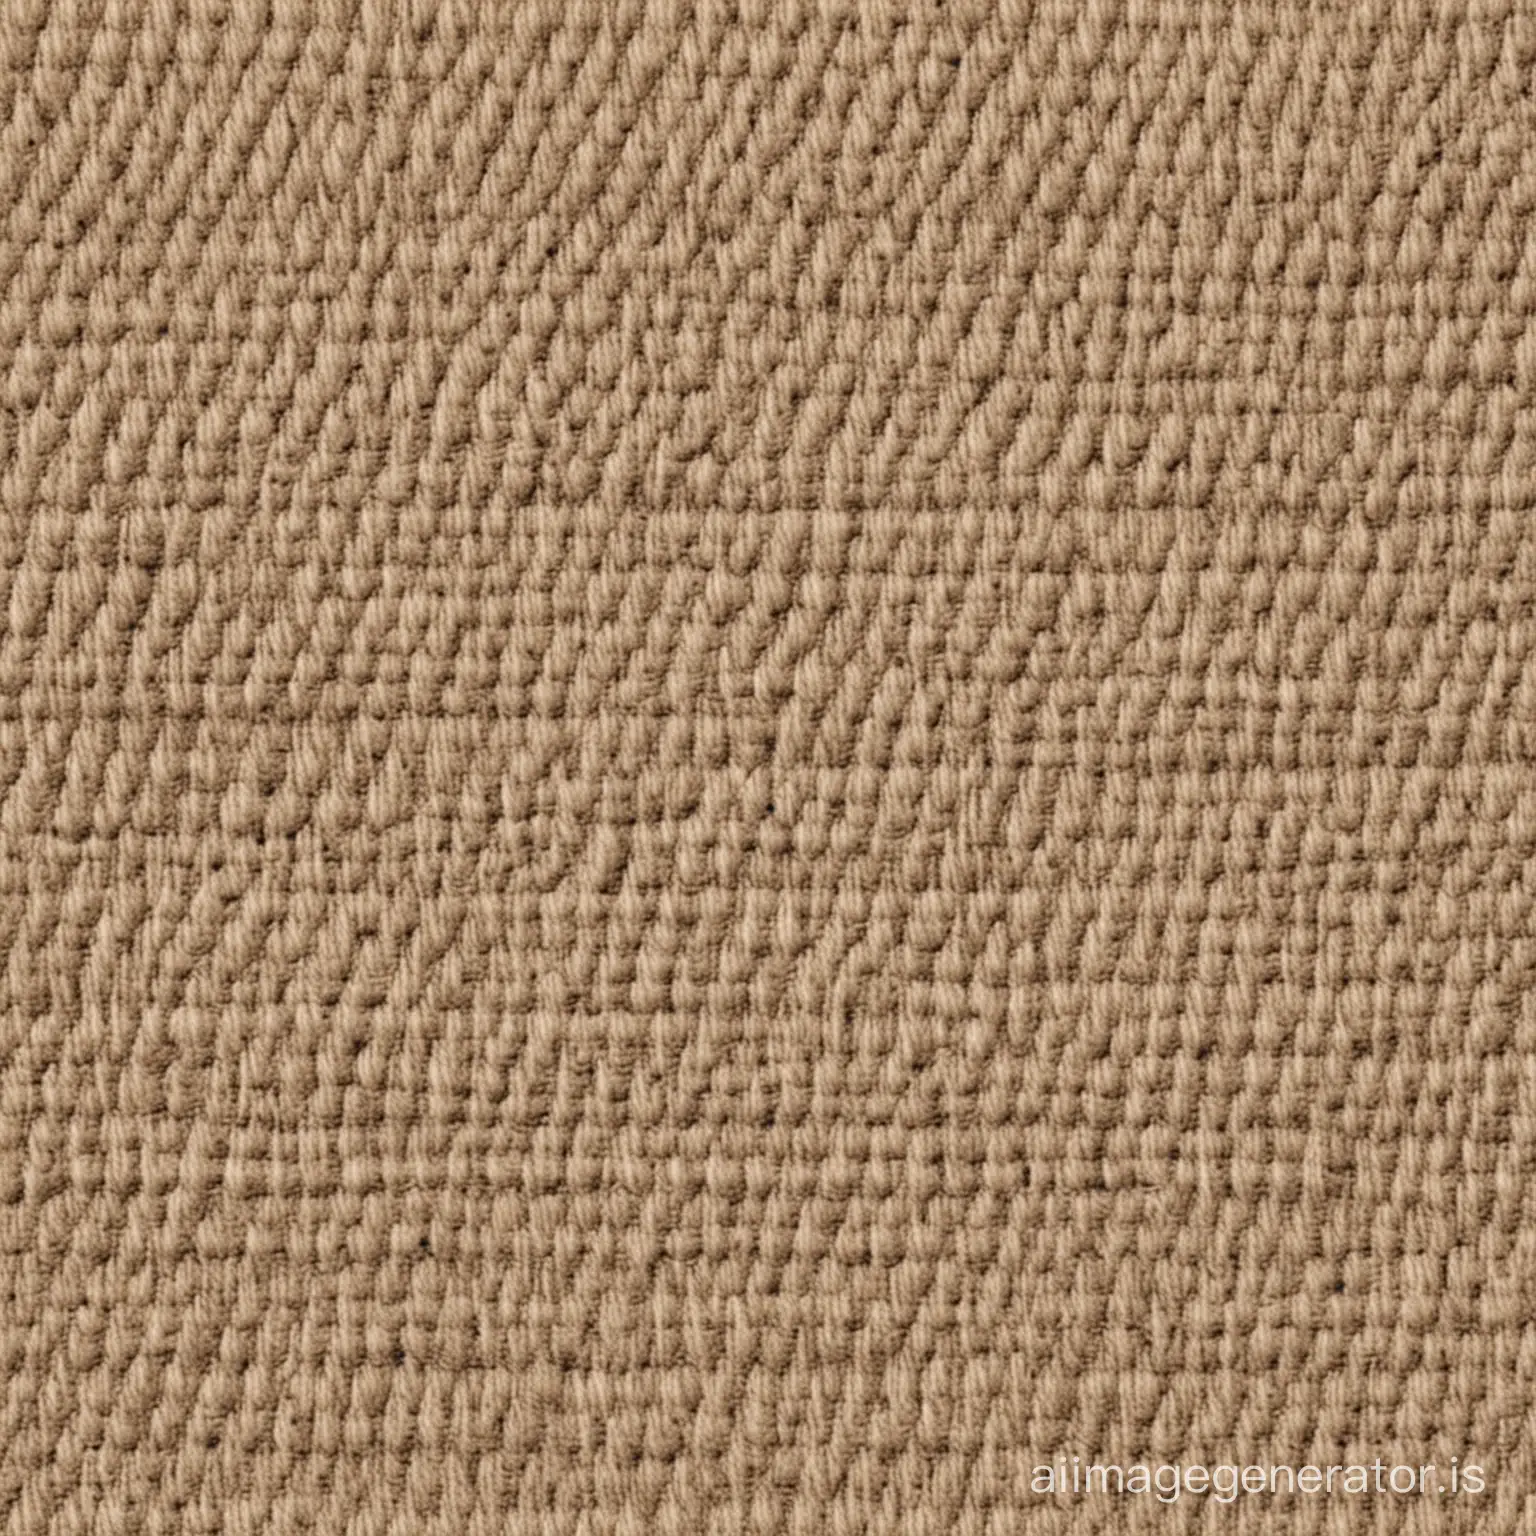 Seamless-Wool-Texture-for-Cloth-Pattern-Design